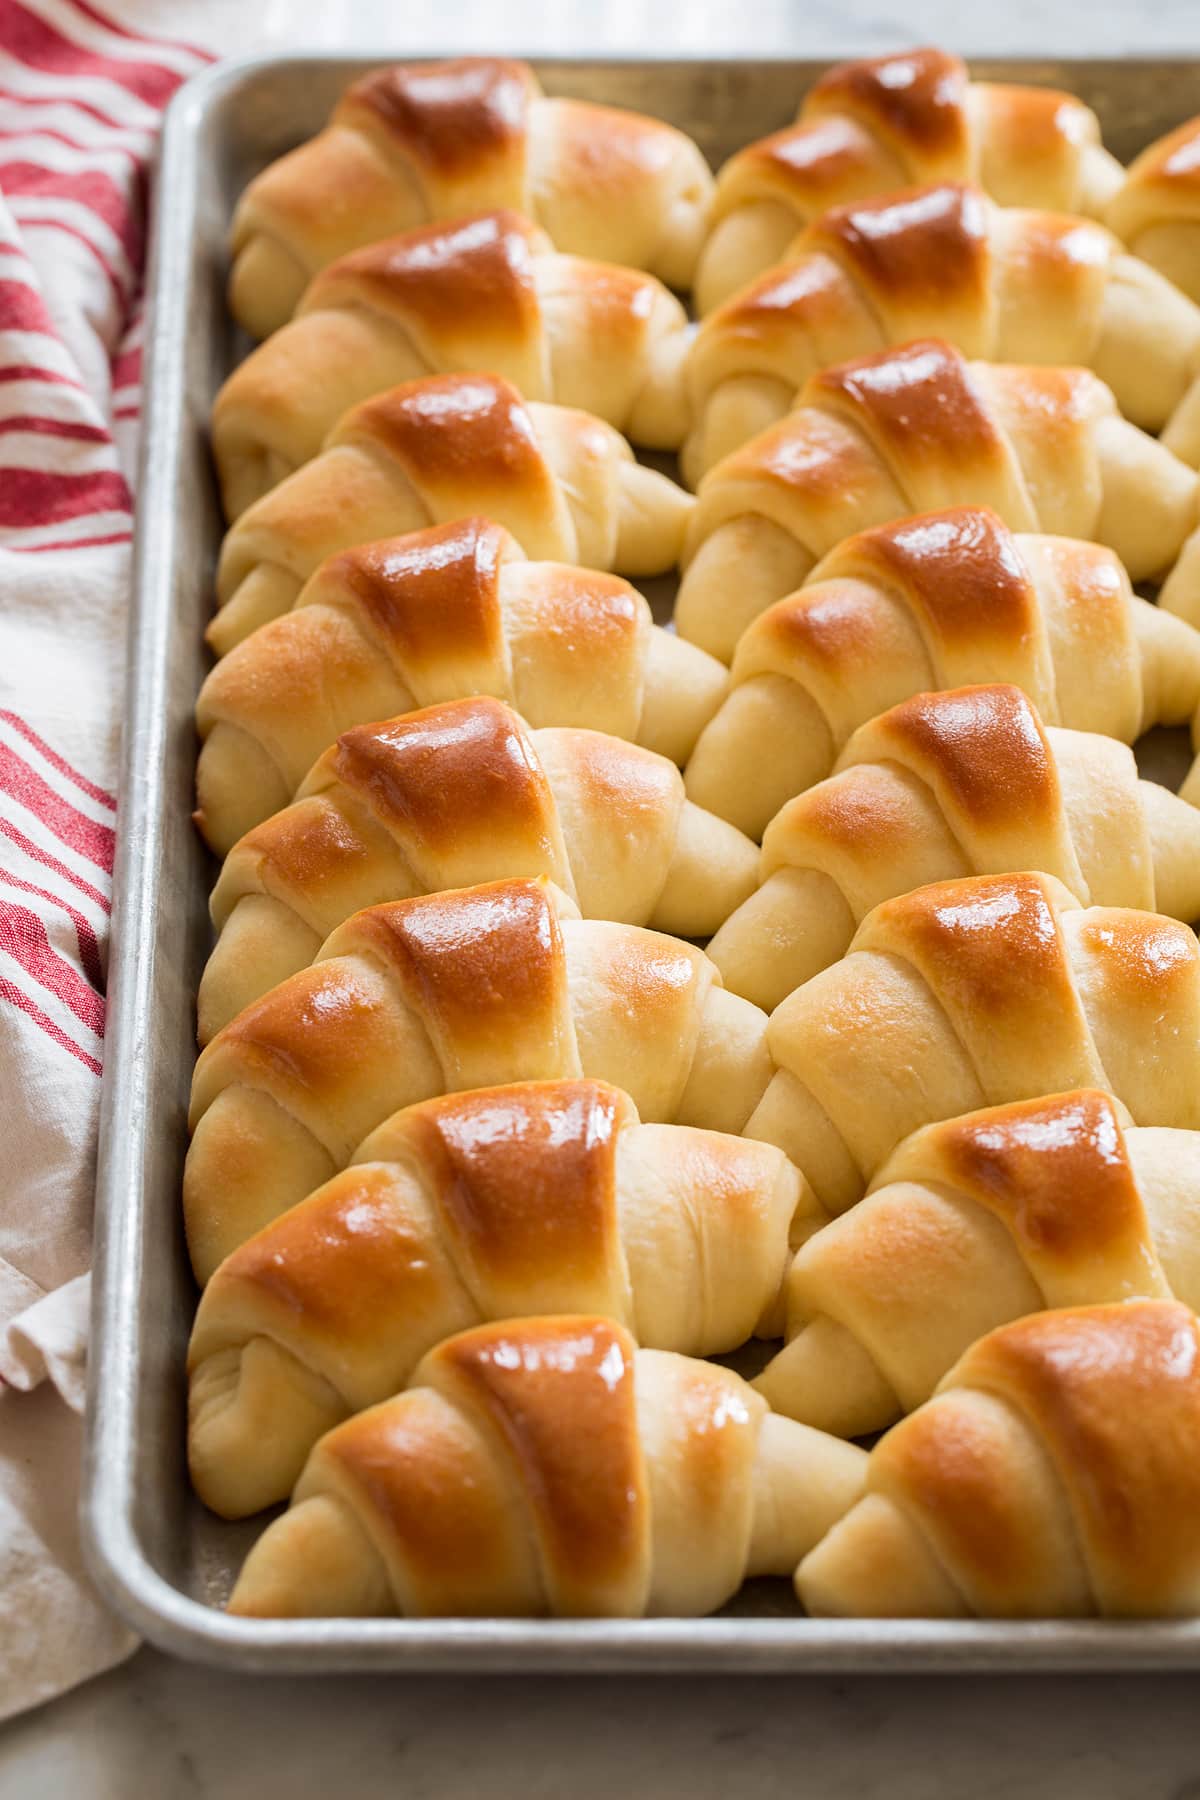 Sheet pan filled with rows of baked dinner rolls.